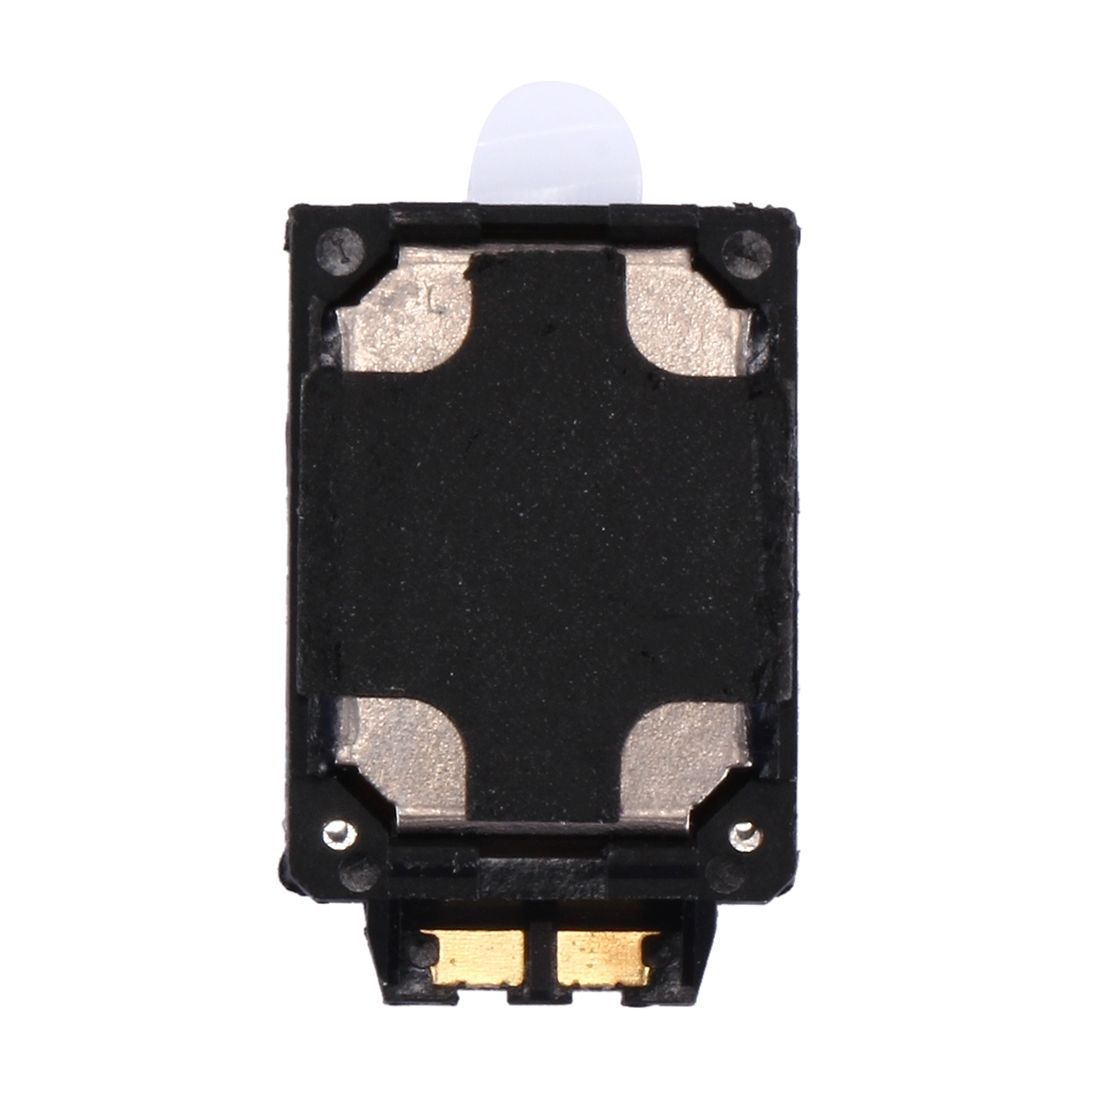 Samsung Galaxy J5 J510 / 2016 Replacement Loudspeaker Buzzer for [product_price] - First Help Tech